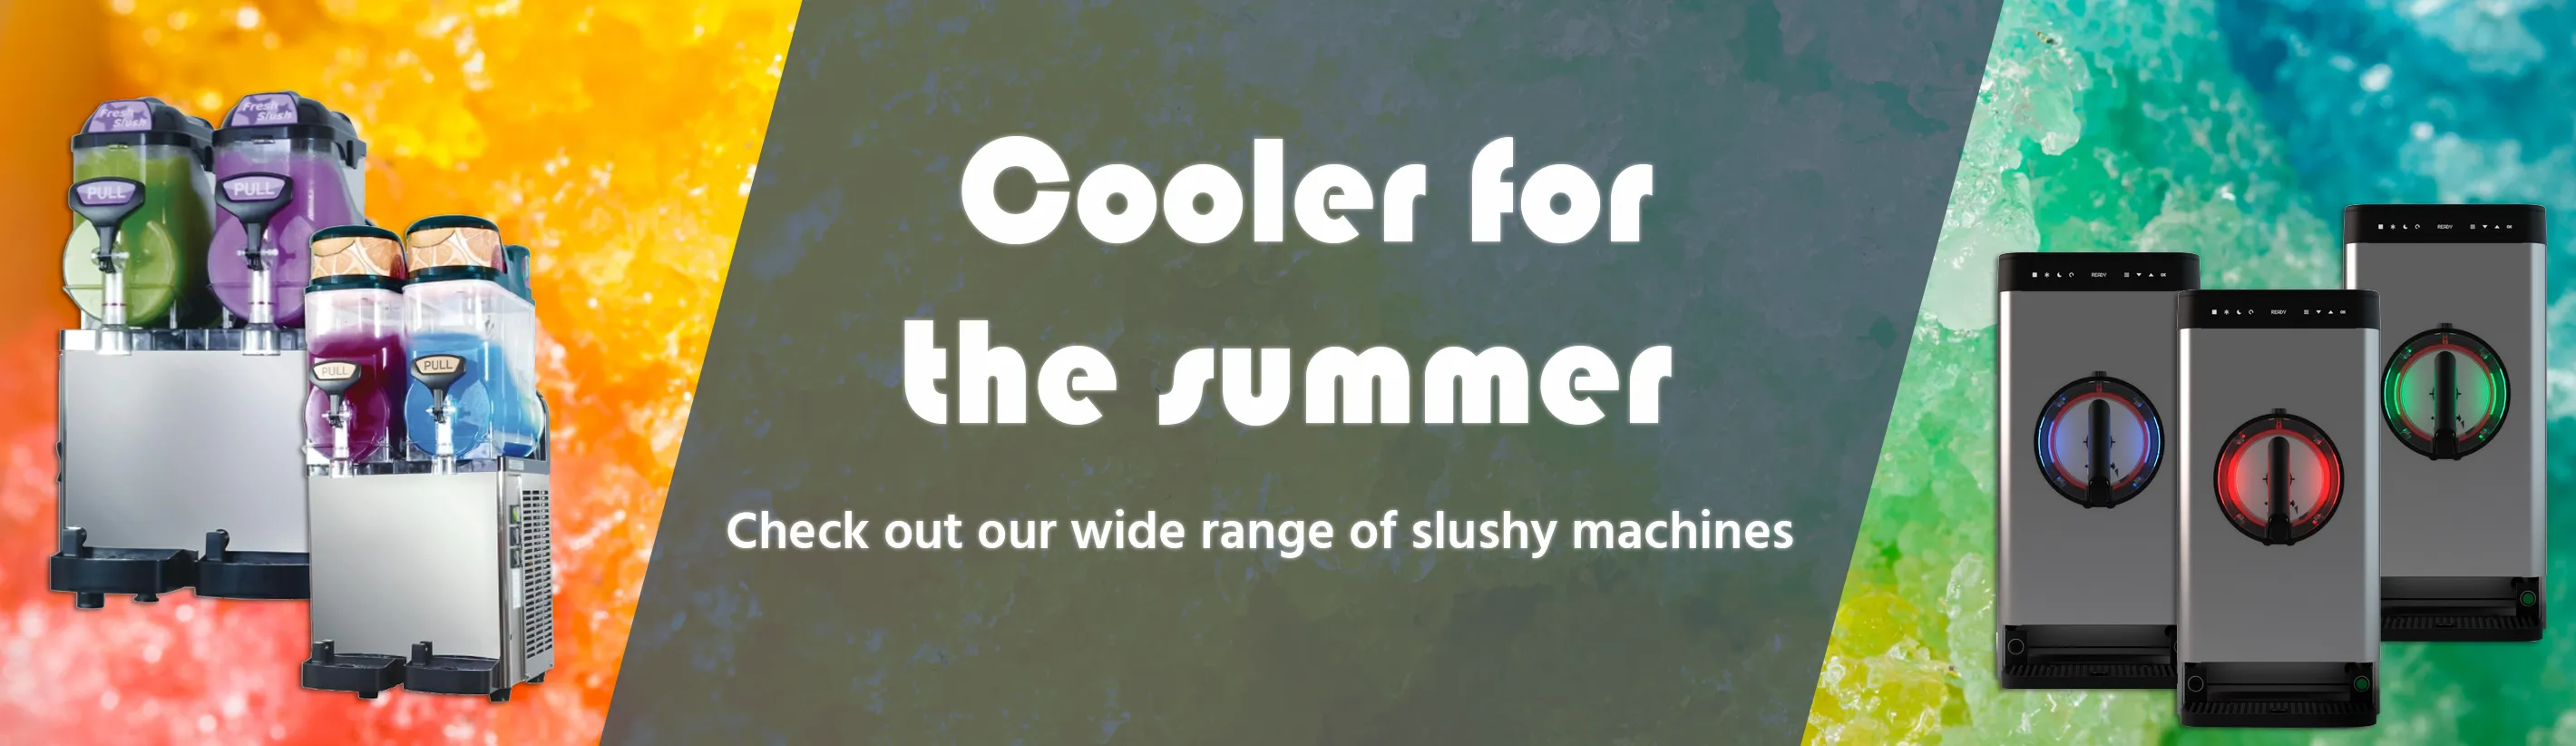 Cooler for the summer, Check out our wide range of slushy machines